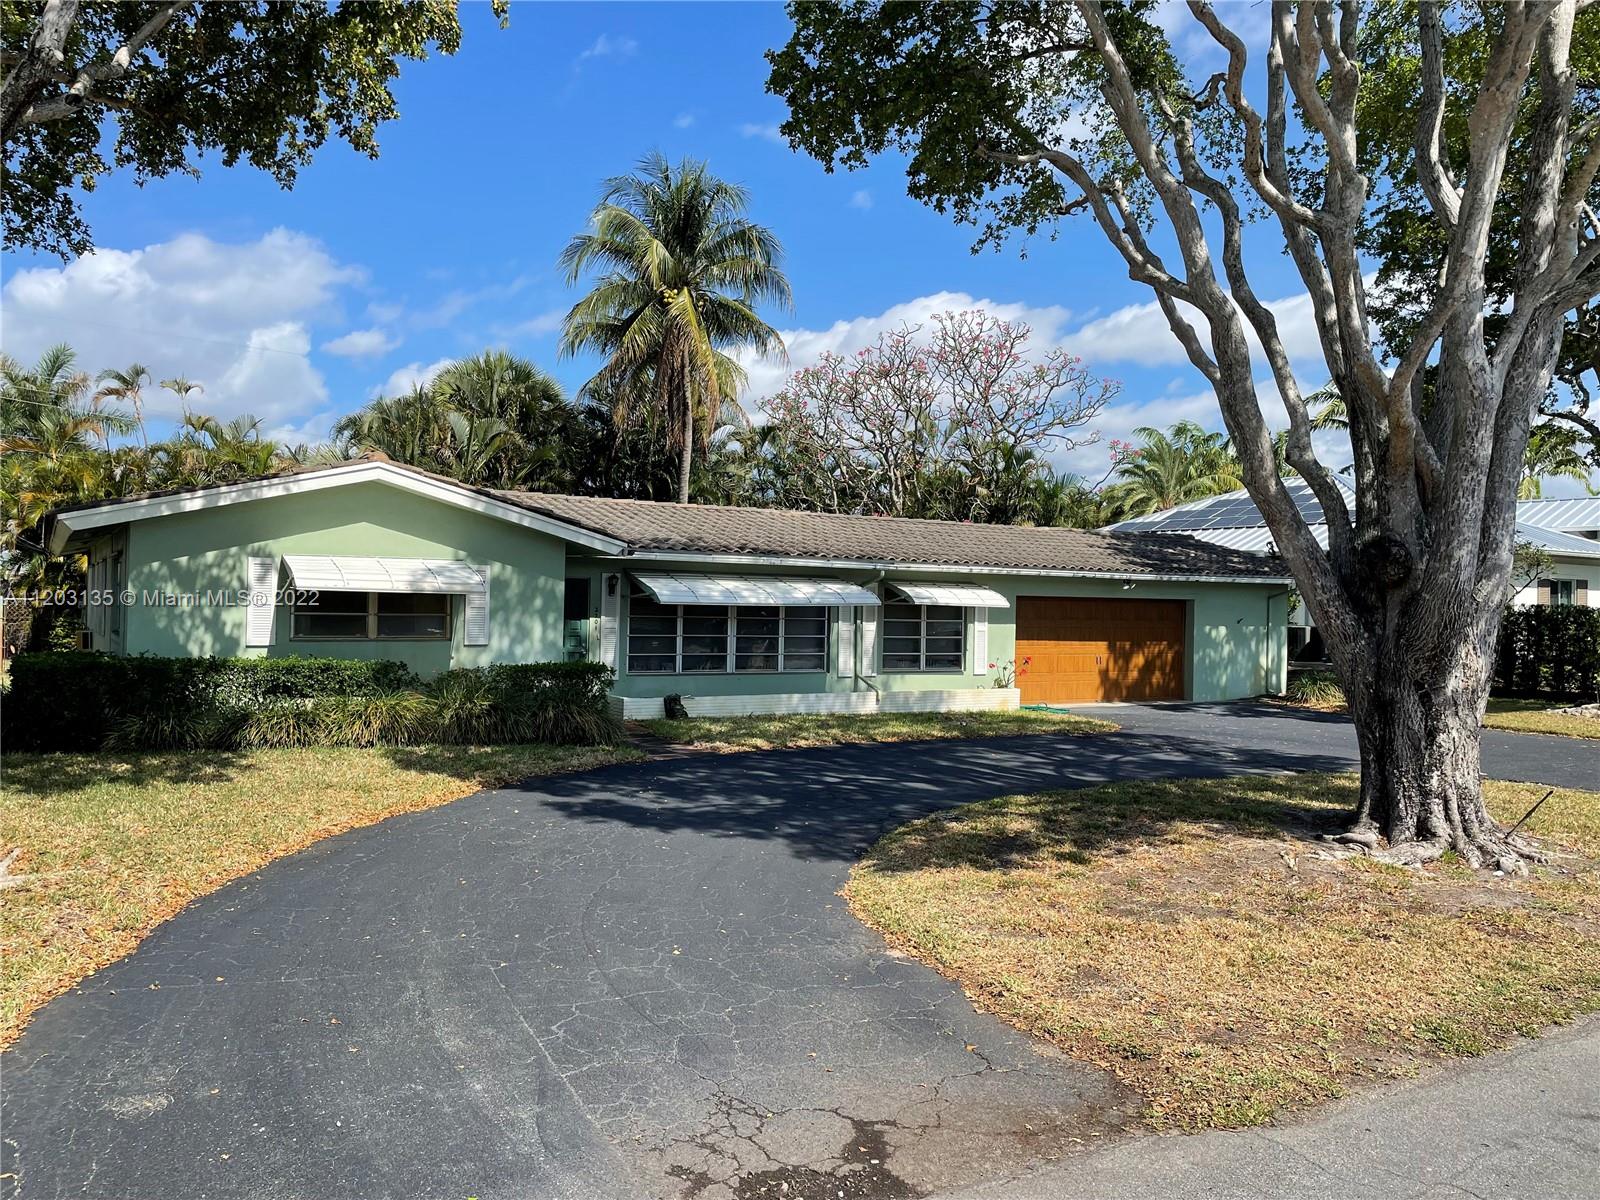 Location, location, location! Renovate or build your dream home. Sought after Coral Ridge/Fort Lauderdale located within the desirable Bayview School District. Only minutes away from Fort Lauderdale's best beaches, dining, shopping, nightlife and Fort Lauderdale International Airport. Original owner since 1950's. Home has hurricane awnings and panels.